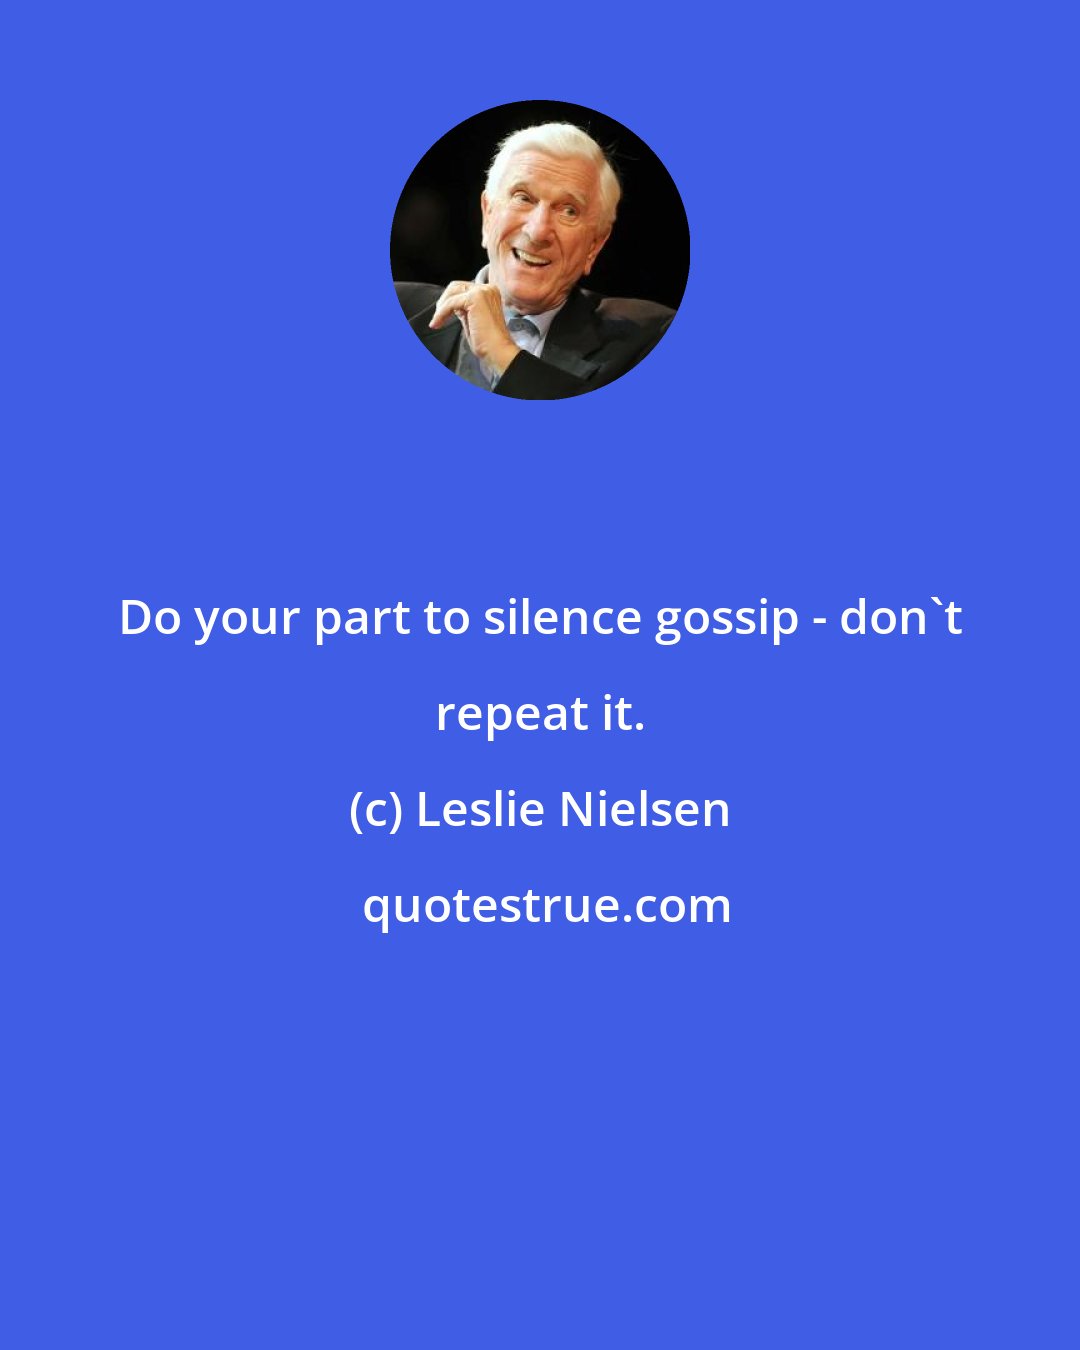 Leslie Nielsen: Do your part to silence gossip - don't repeat it.